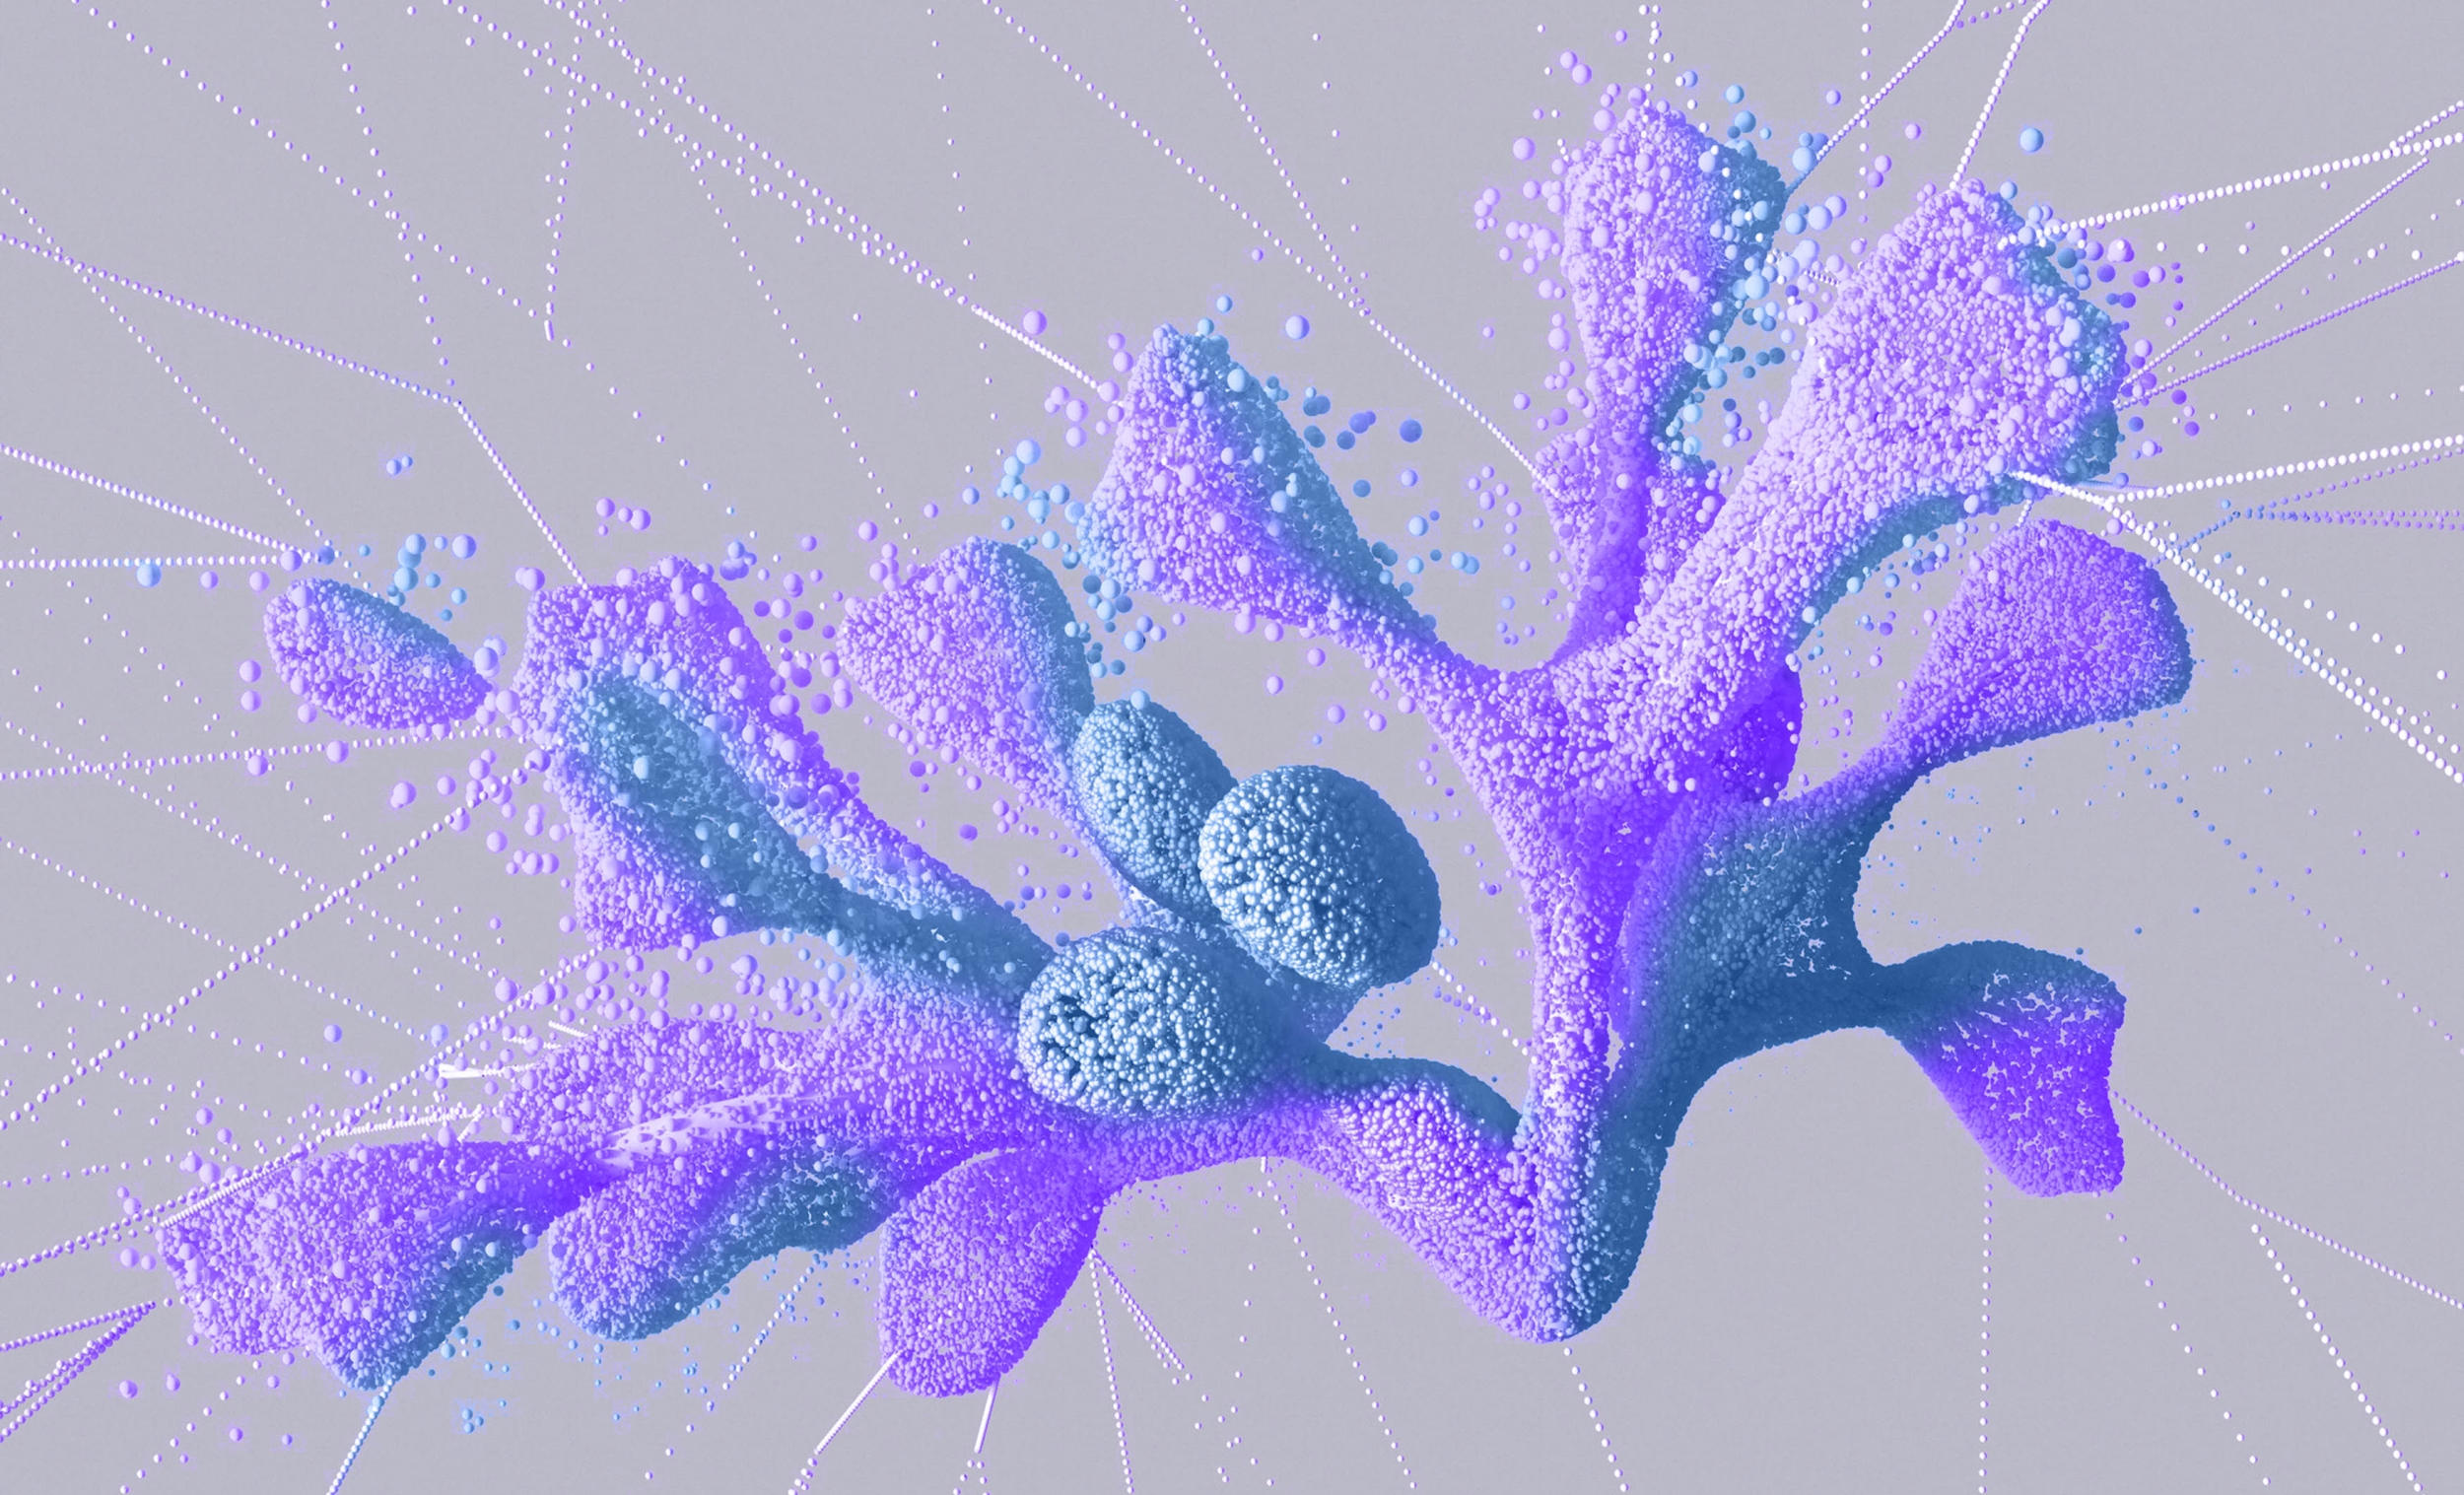 An abstract image in purple and blue, illustrating the idea of connectivity and an ecosystem of embedded services.